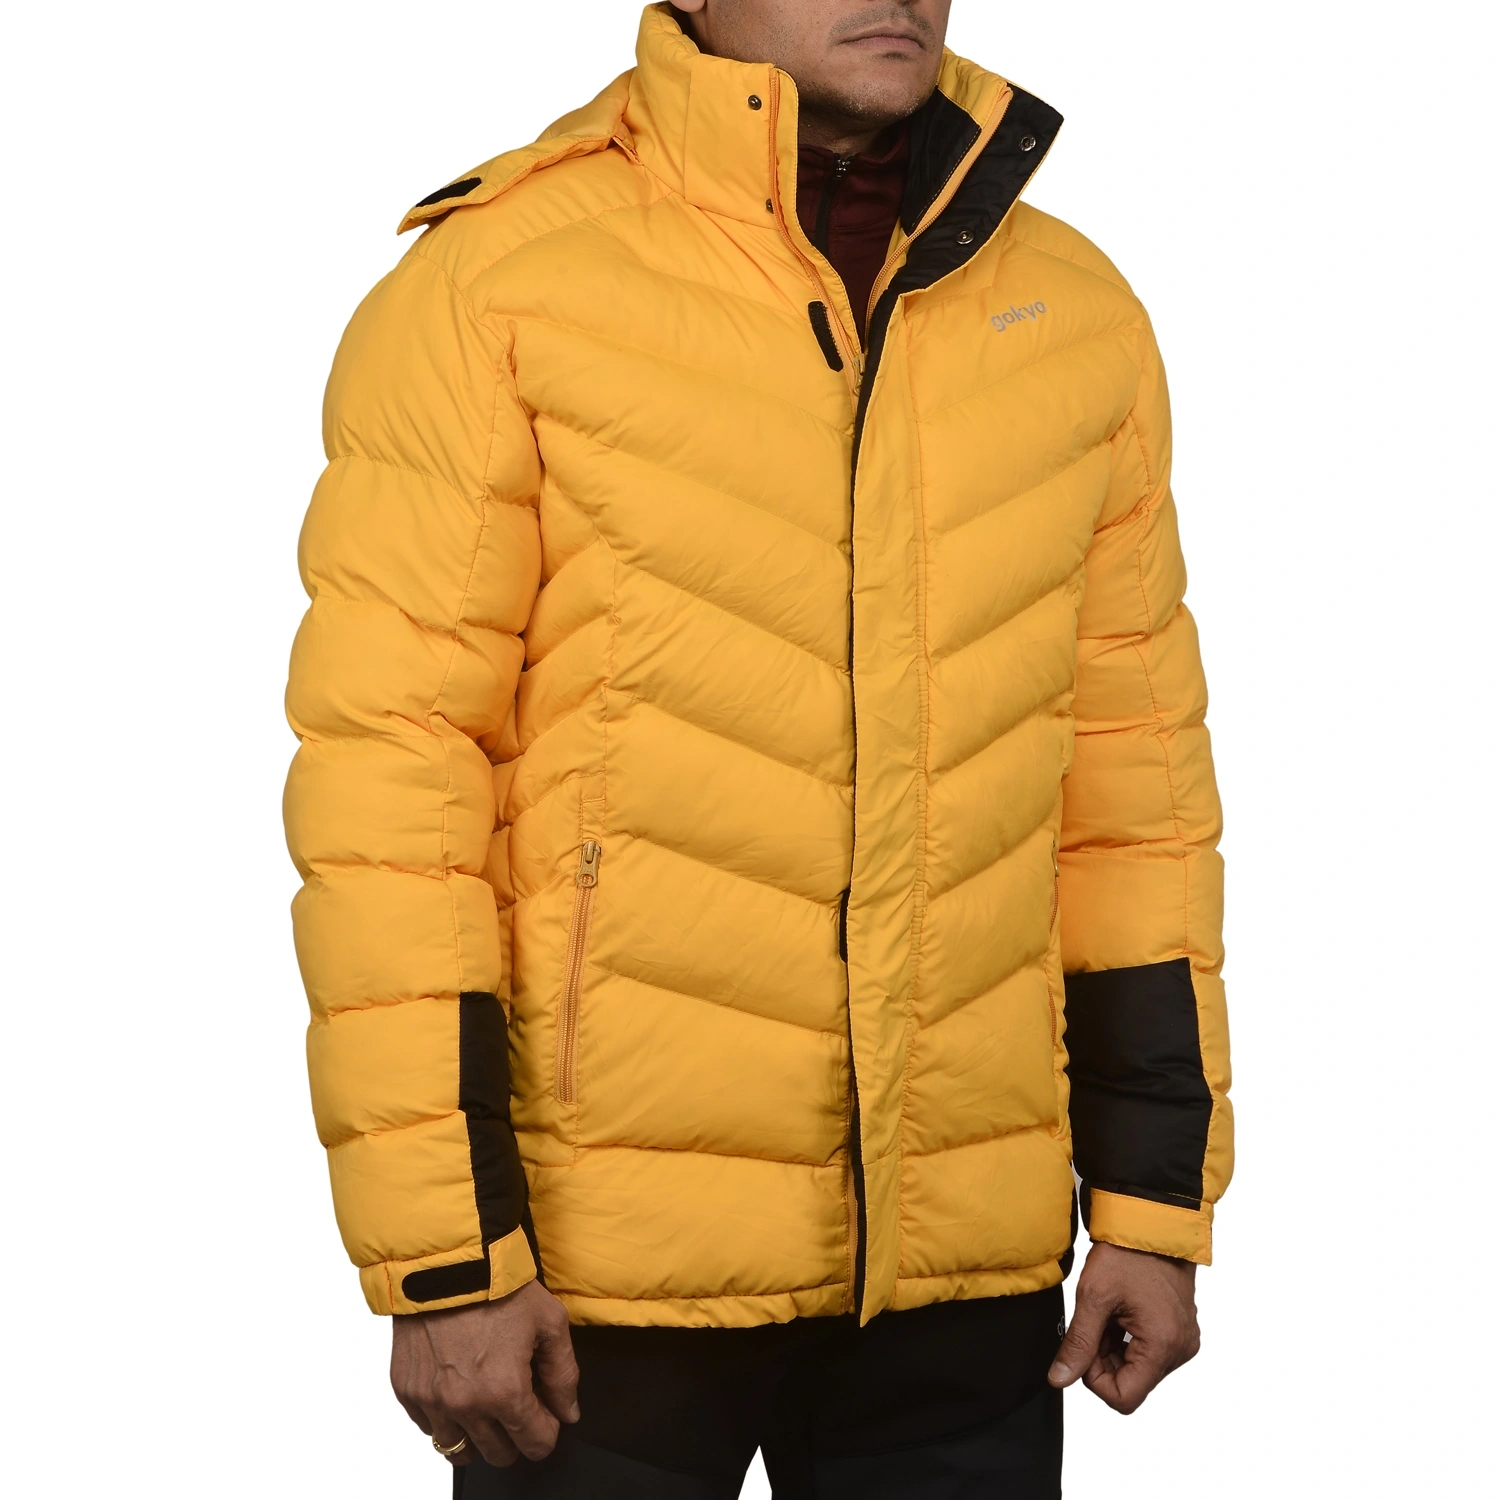 K2 Survivor Down Jacket for Men: Stylized Functionality for Extreme Cold Weather Expeditions (Up to -20°C)-XL-Yellow-1